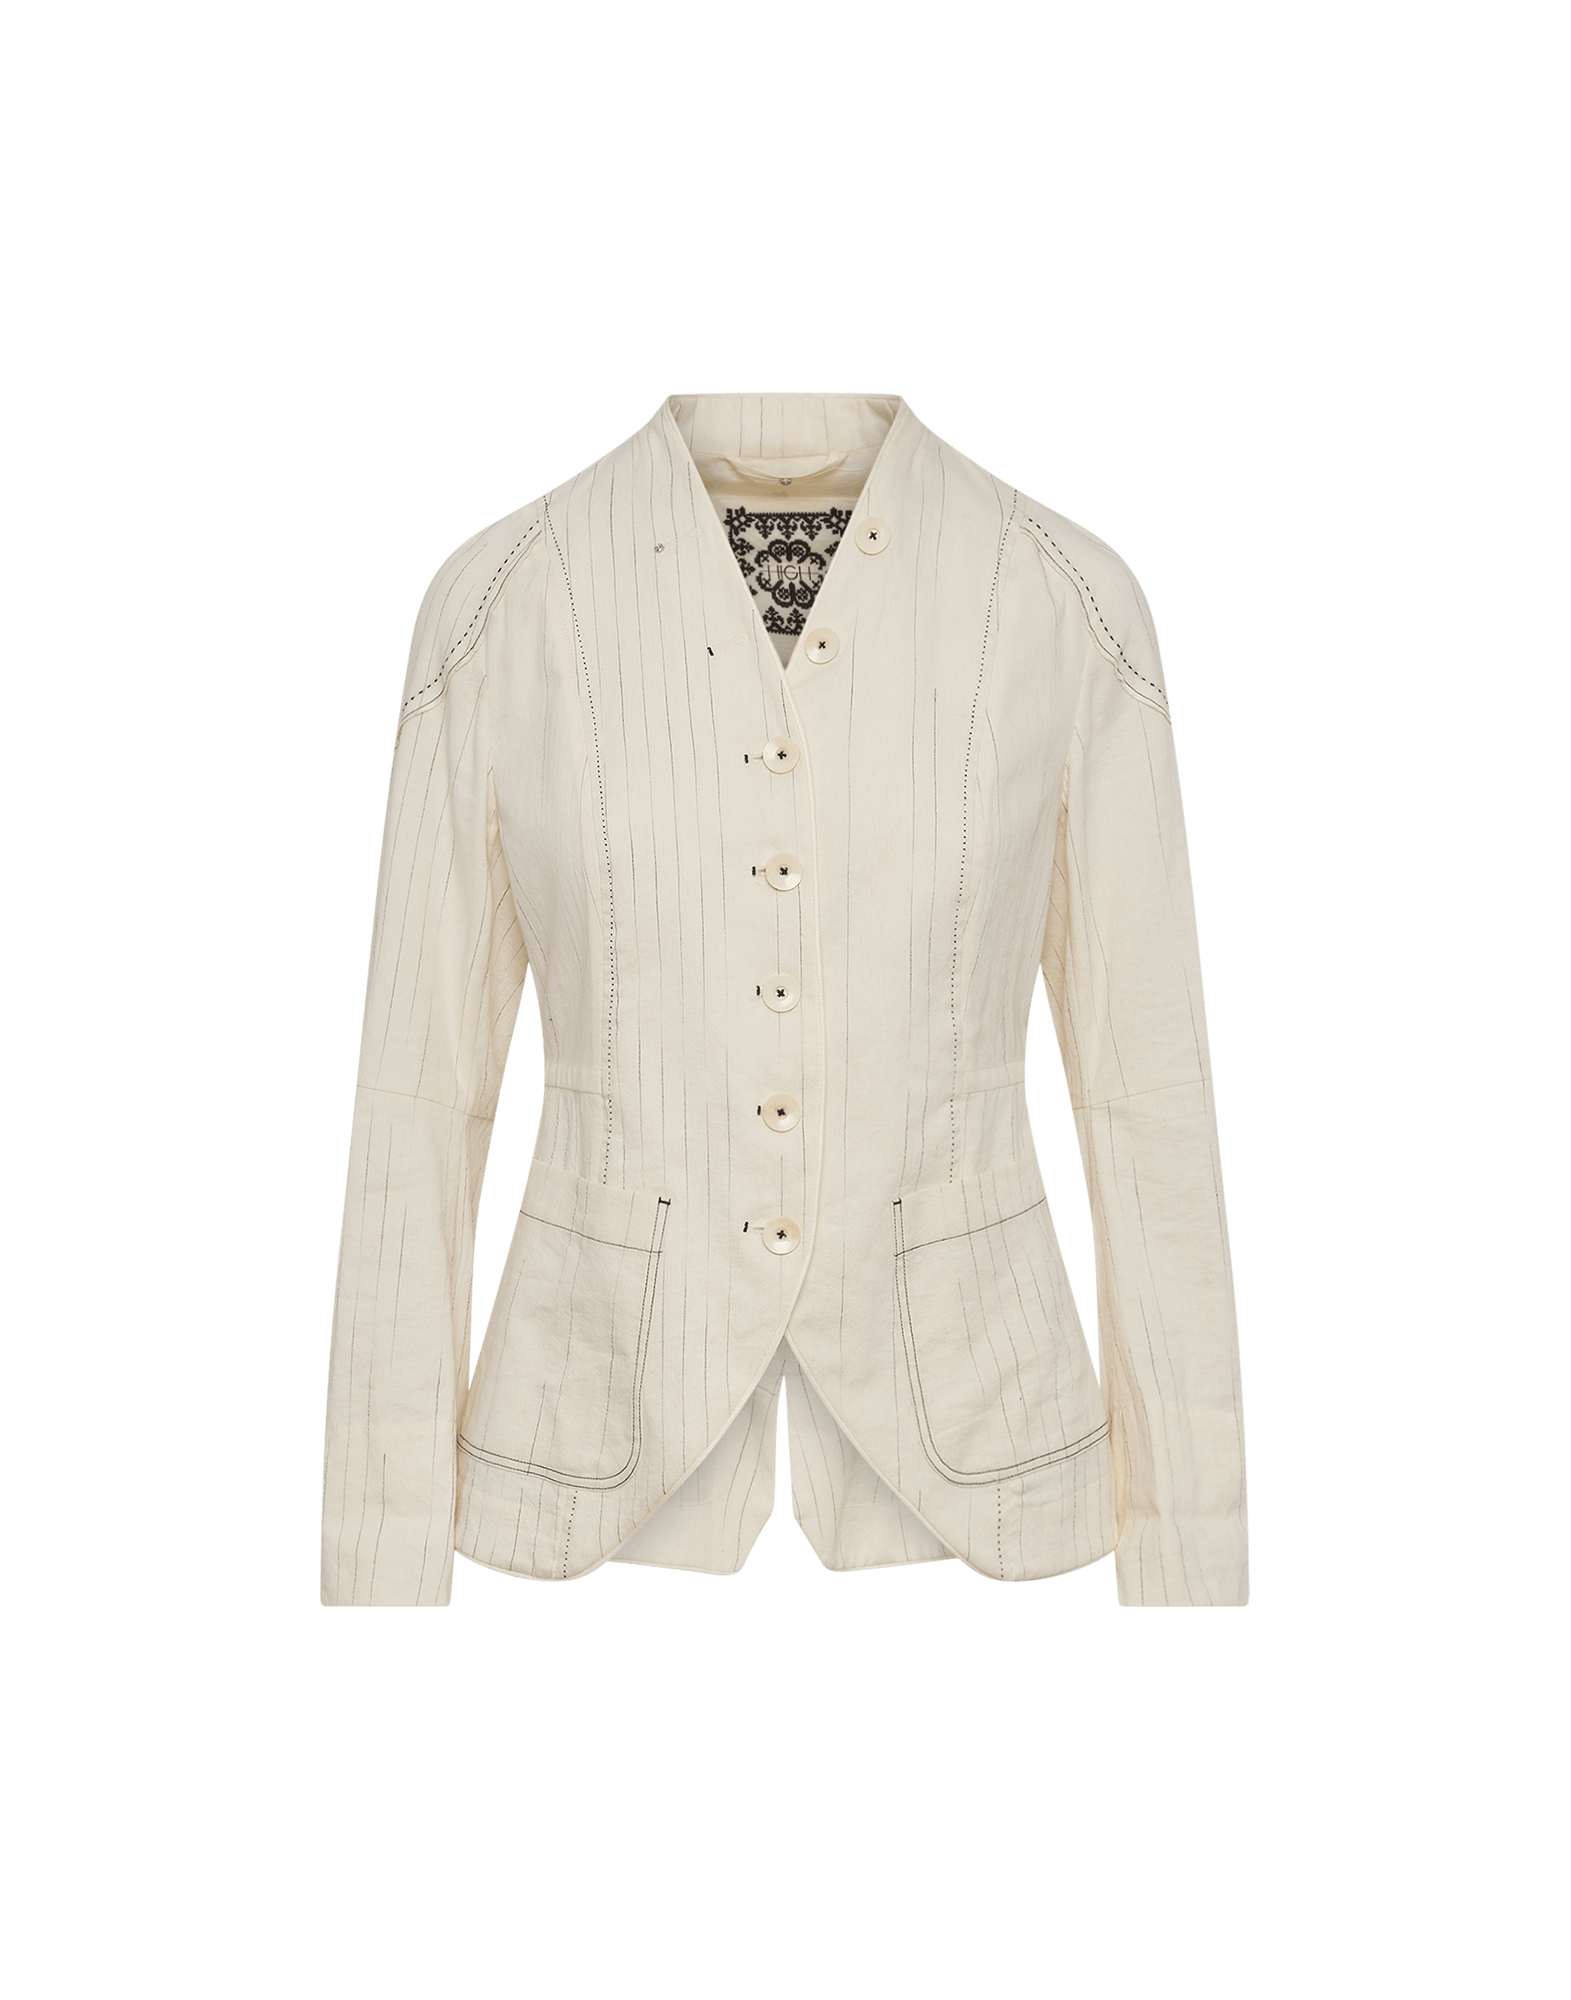 Contour Unlined Jacket in Cream